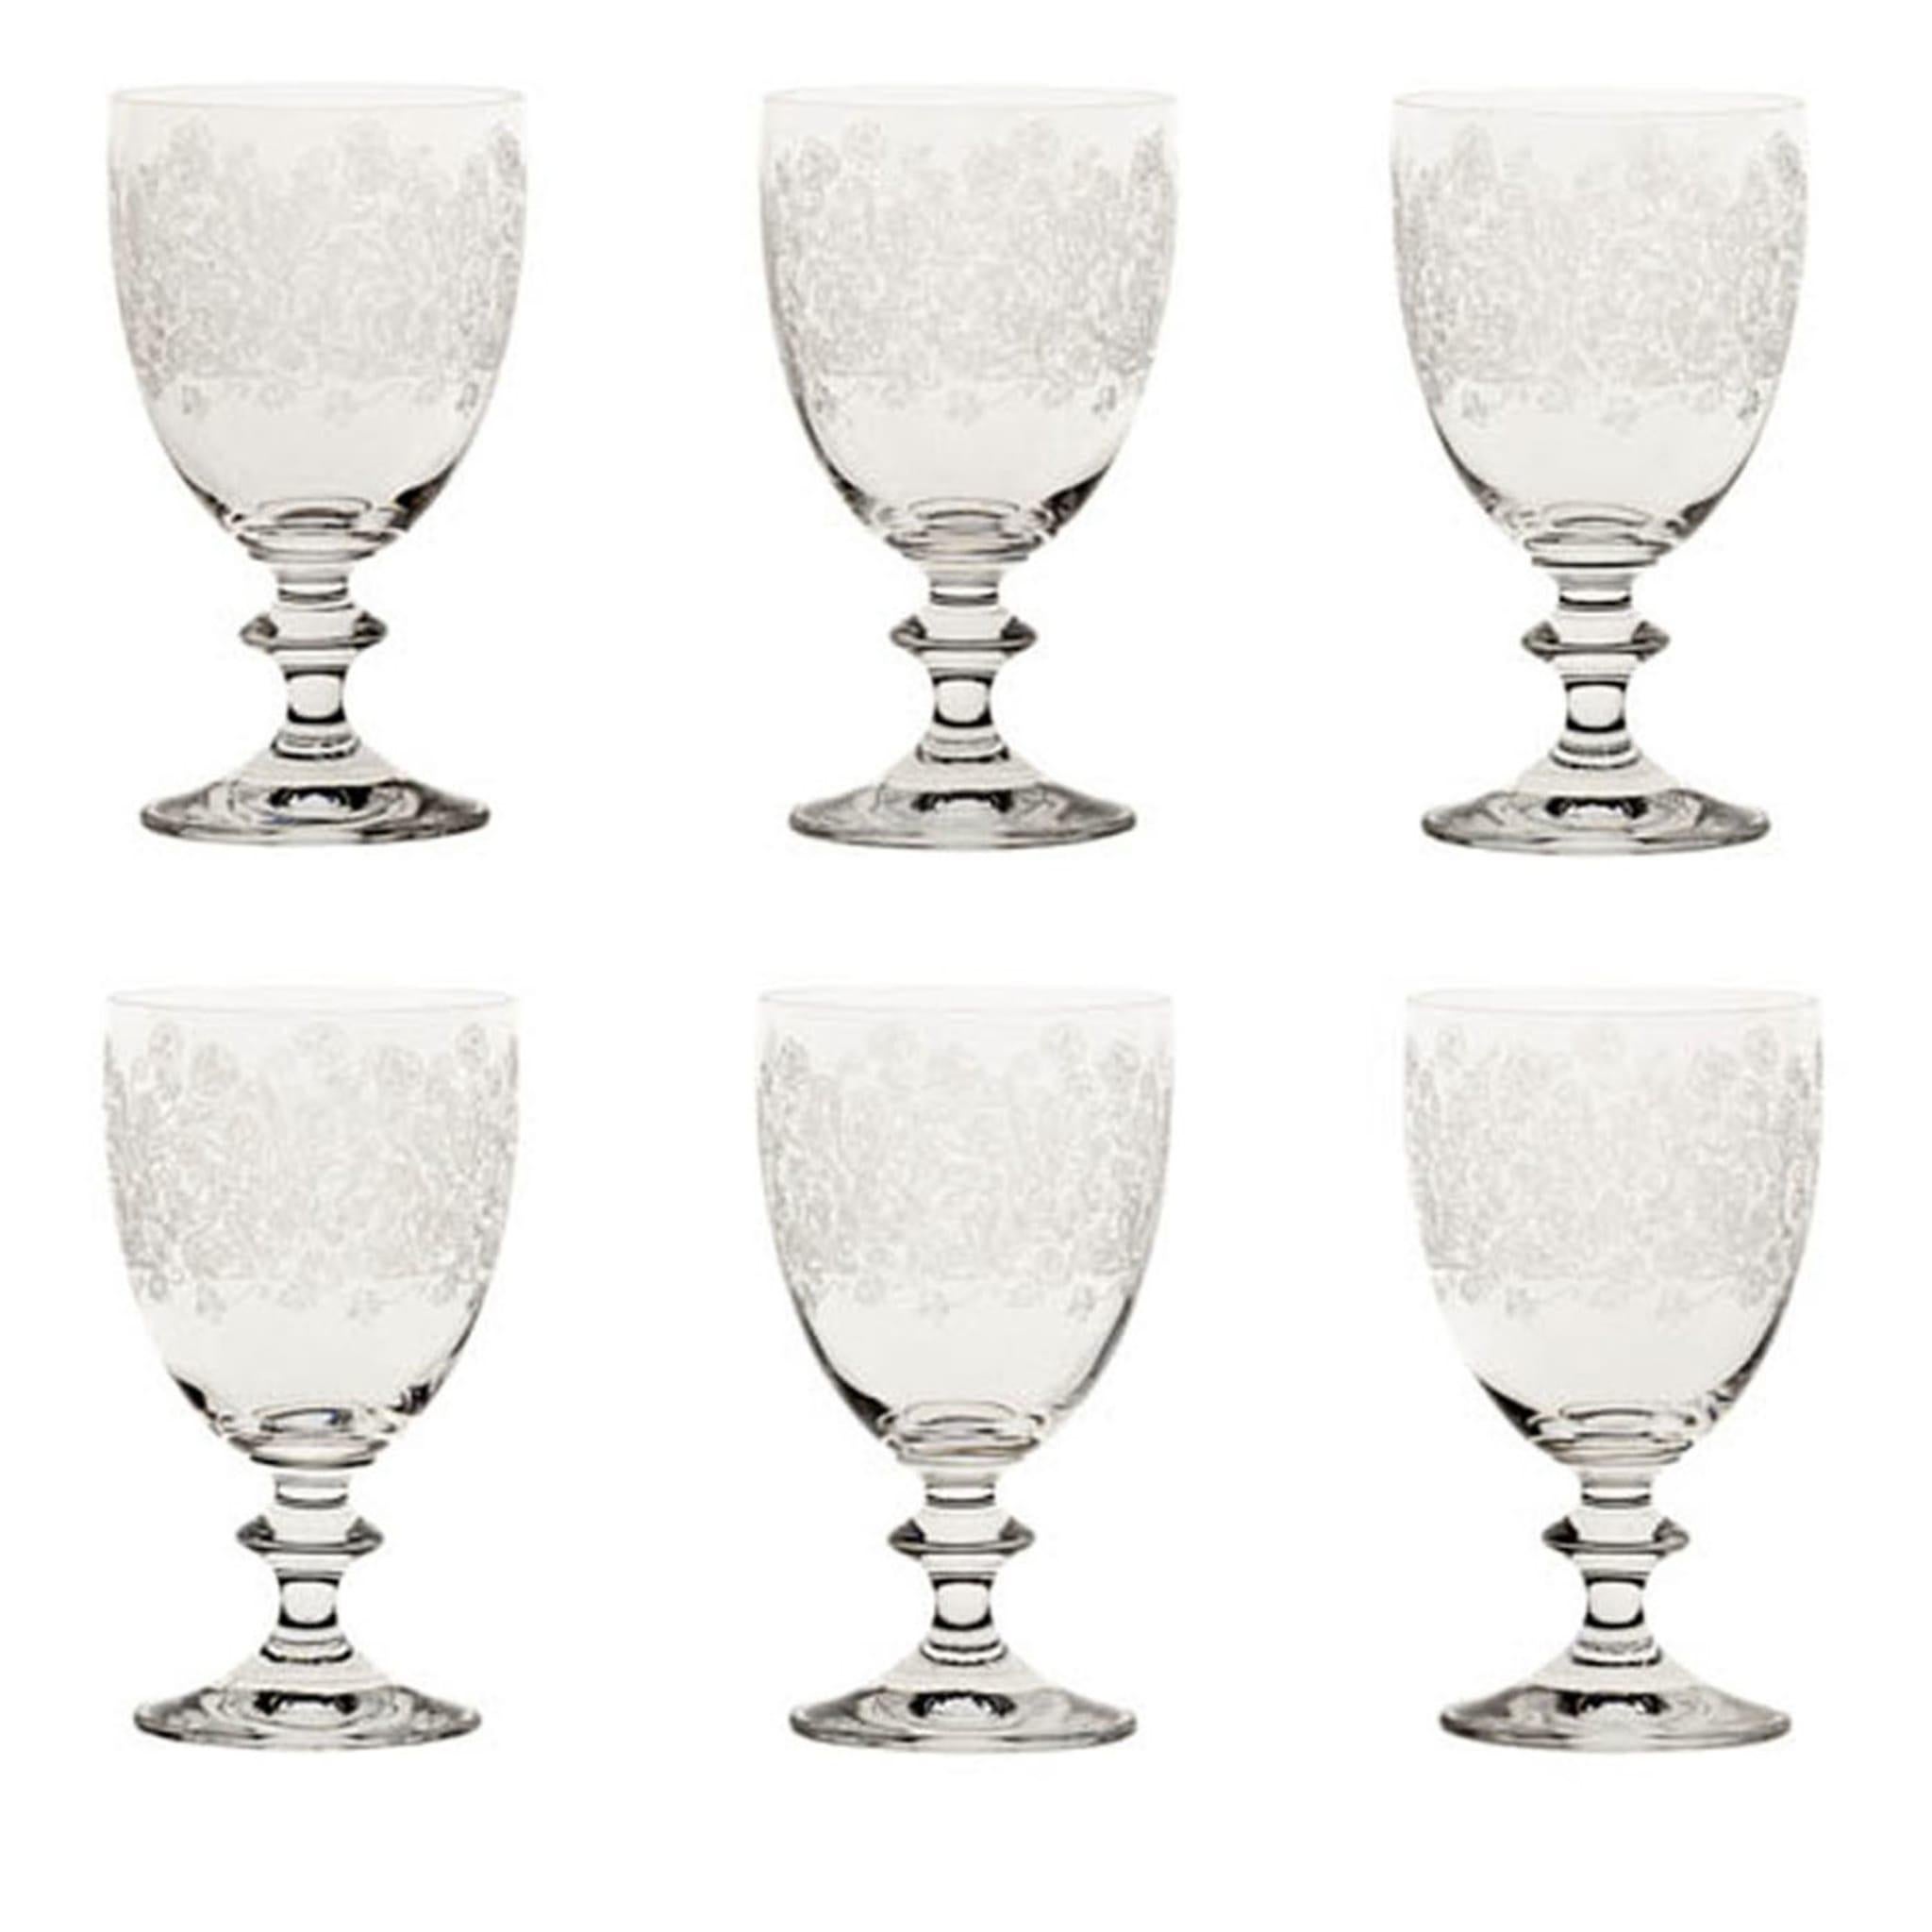 This set of 6 water glasses are simple yet elegant in their construction and they feature a striking decoration on their exterior achieved through pantography.